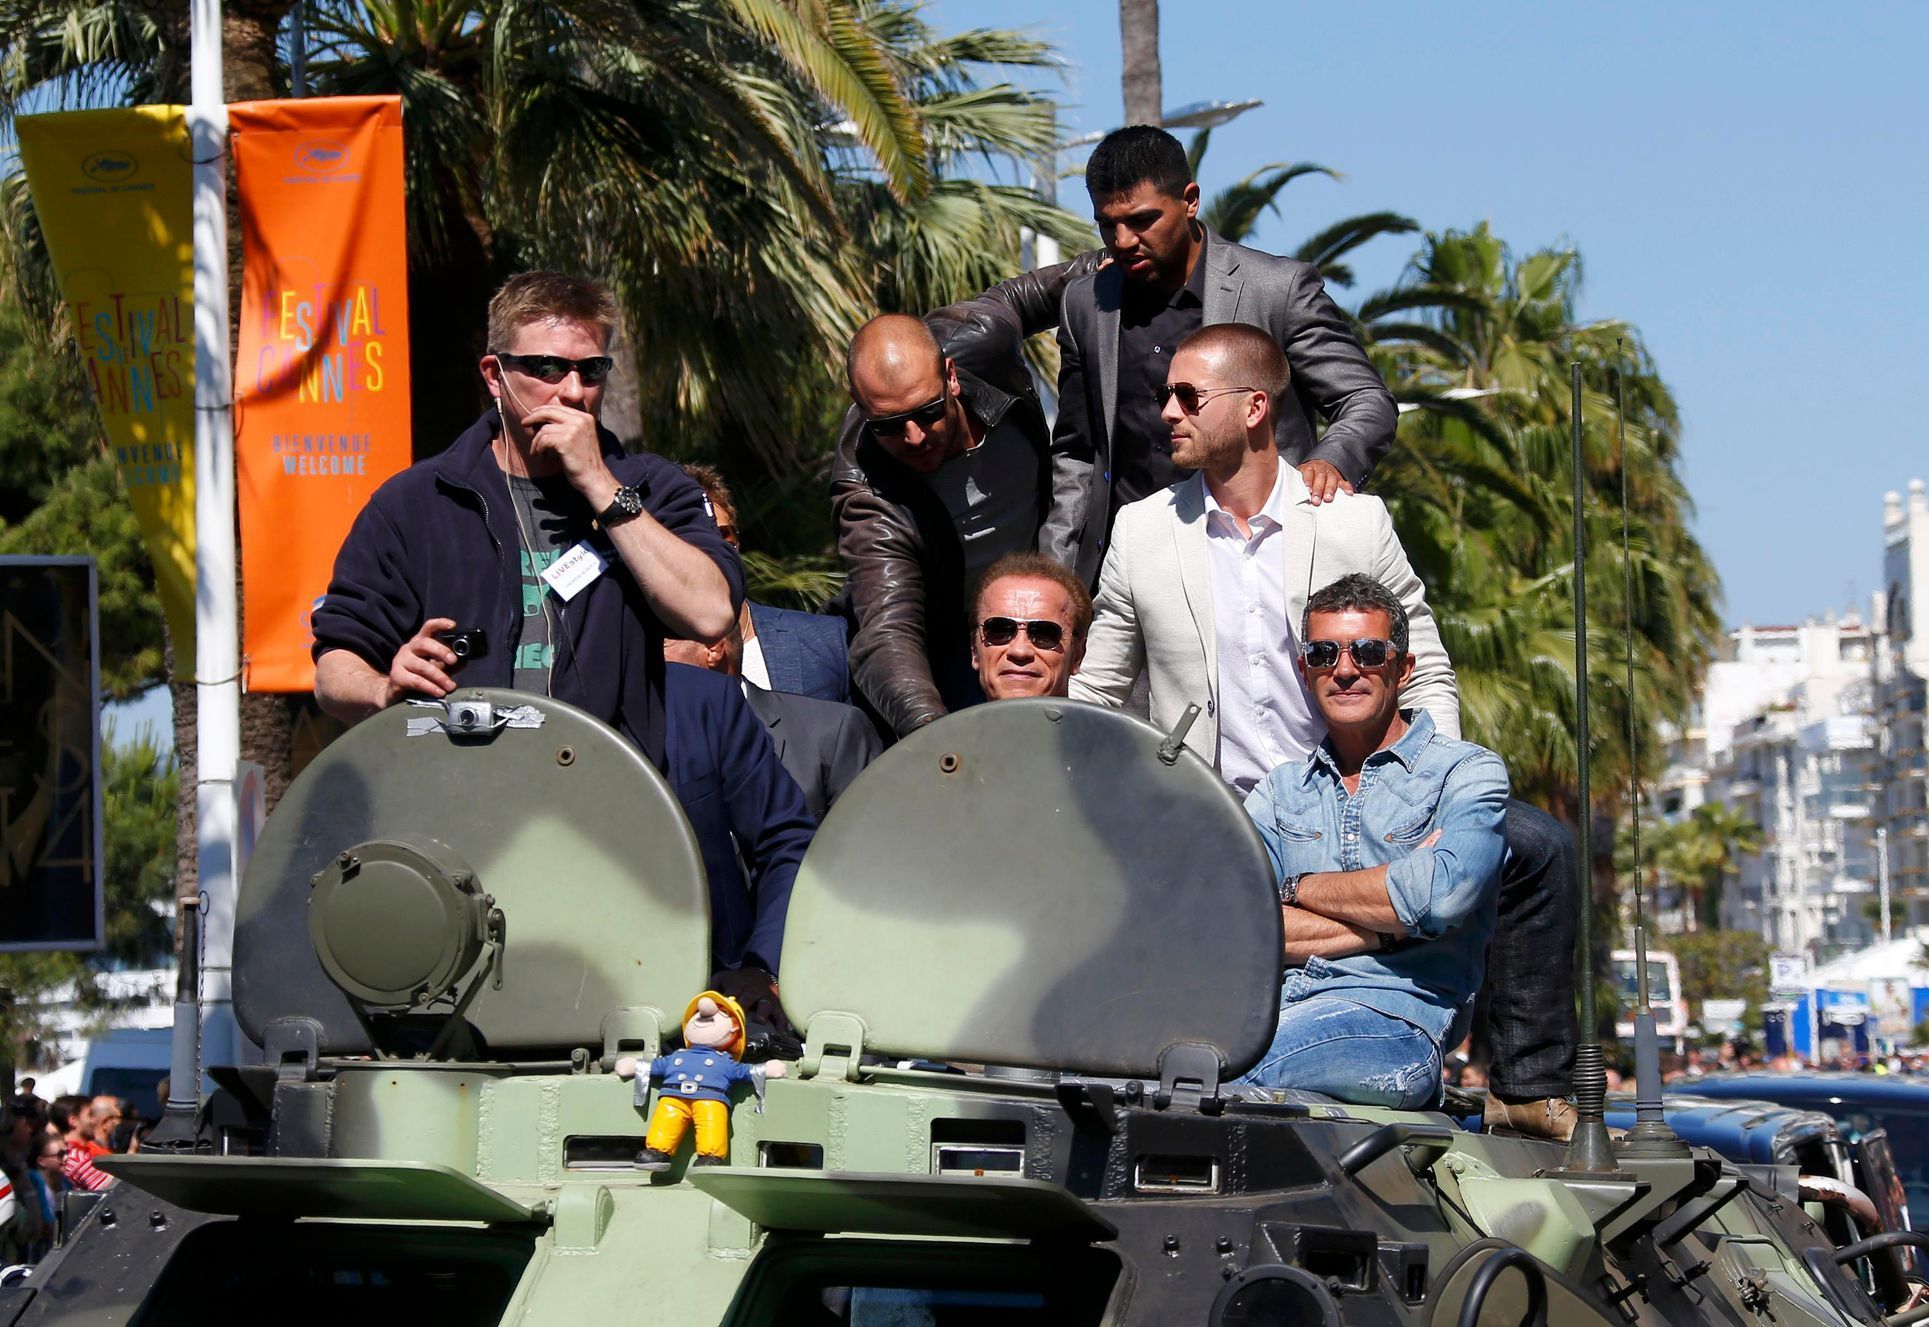 Cast members Victor Ortiz, Arnold Schwarzenegger, Victor Ortiz, Glen Powell and Antonio Banderas pose on a tank as they arrive on the Croisette to promote the film &quot;The Expendables 3&quot; during